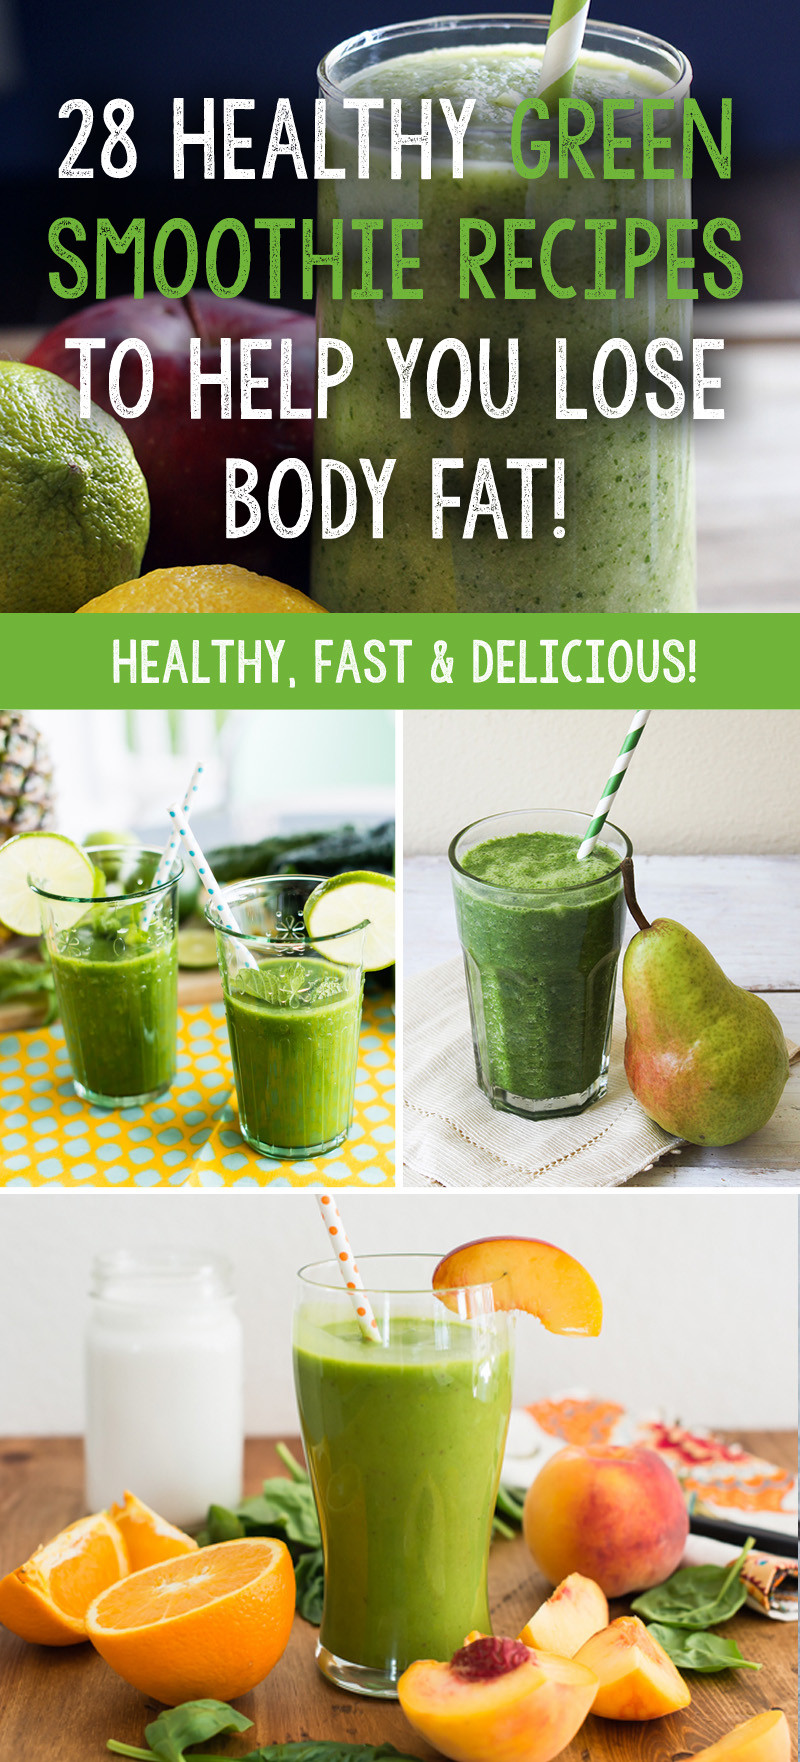 Best Healthy Smoothie Recipes
 28 Healthy Green Smoothie Recipes To Help You Lose Body Fat